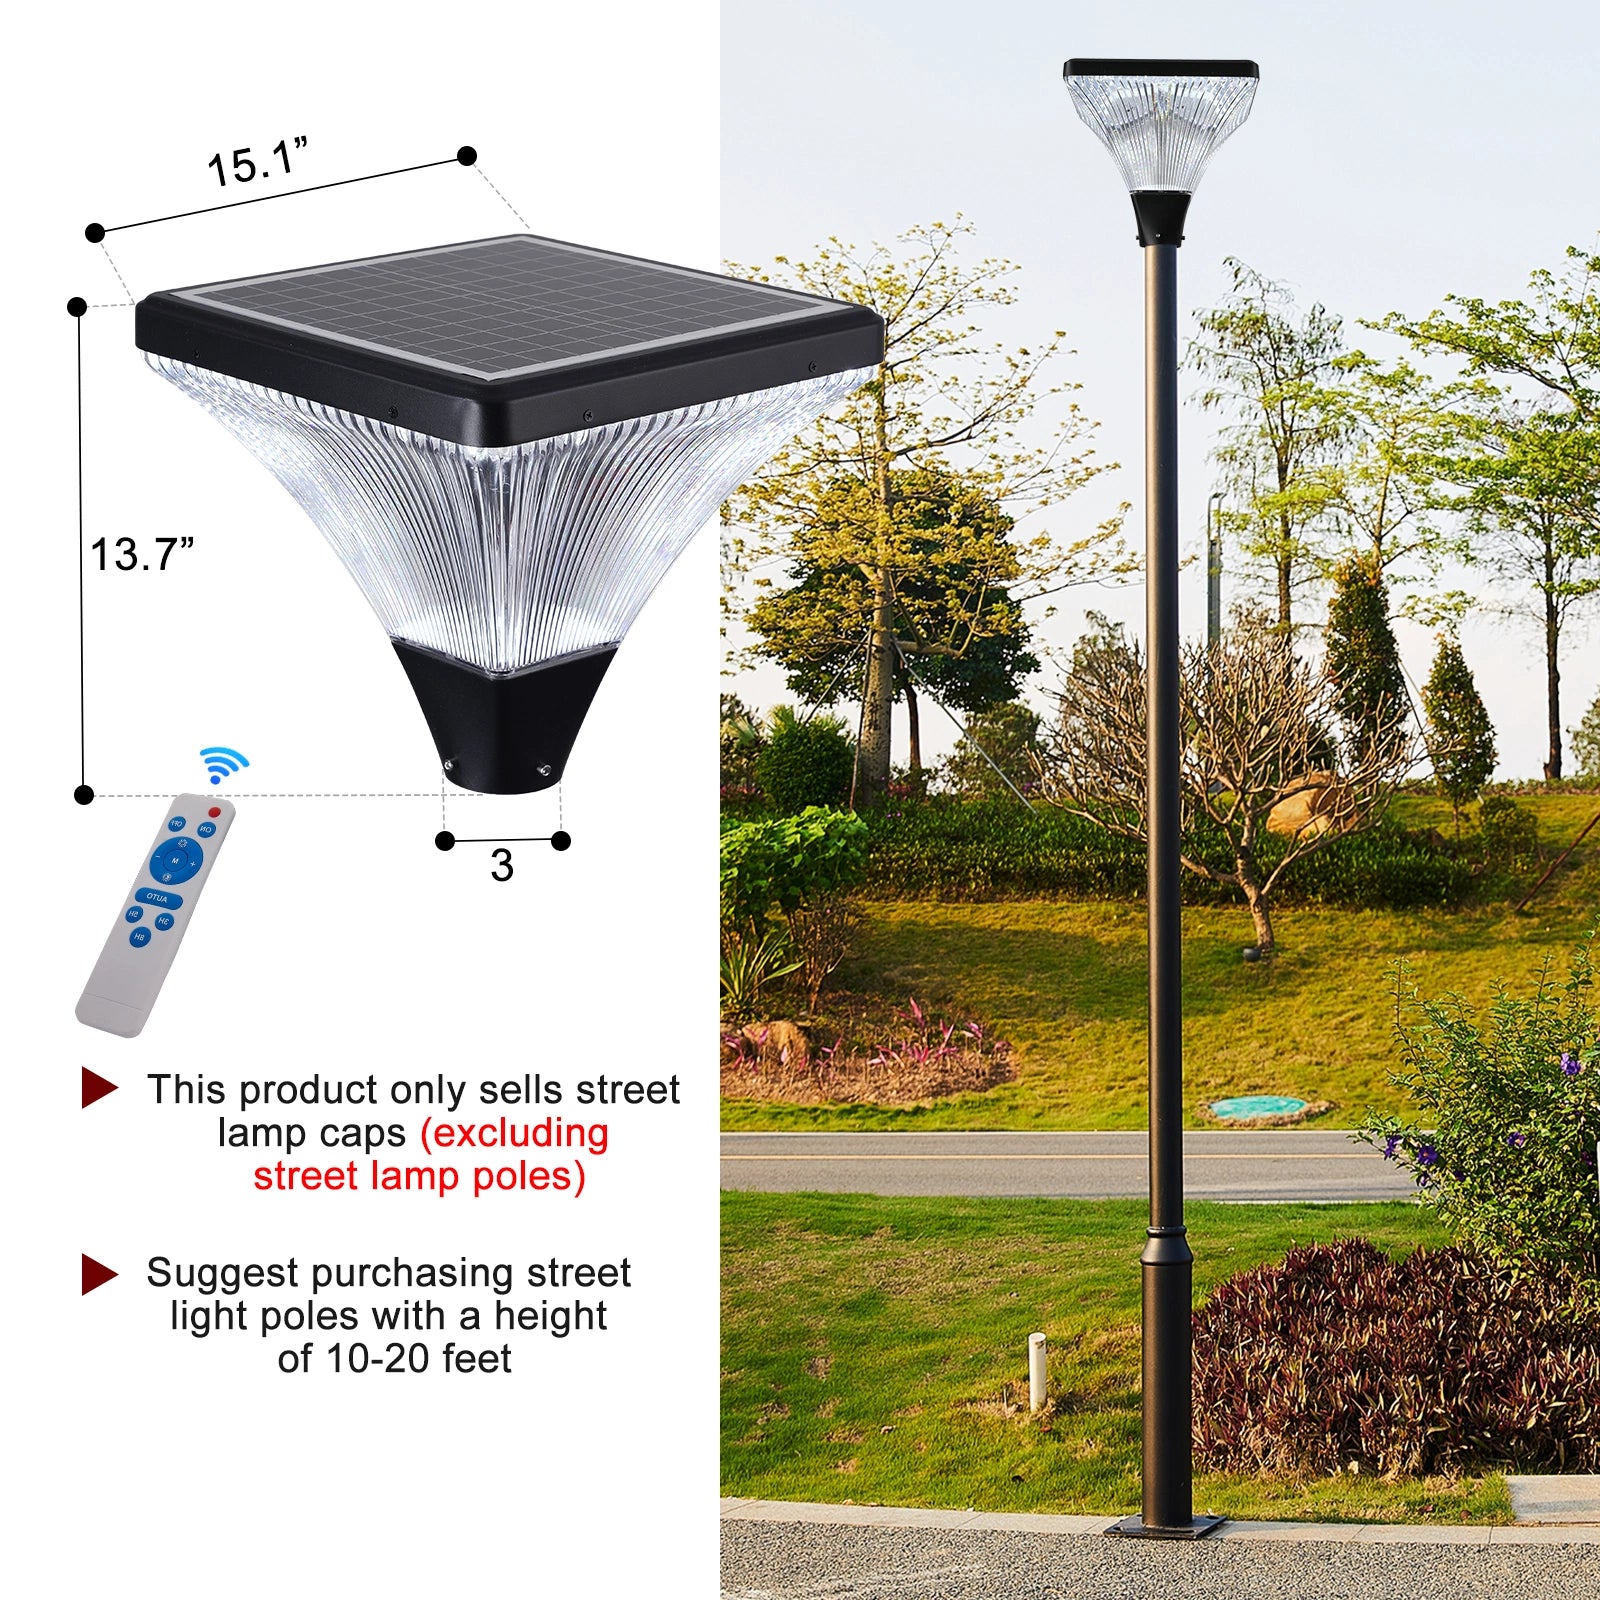 LazyGround™ Landscape Solar Post Light, Outdoor Patio Solar Lamp with Remote Control, LED Light Decor for Garden Deck Street, Weatherproof - Lazy Pro